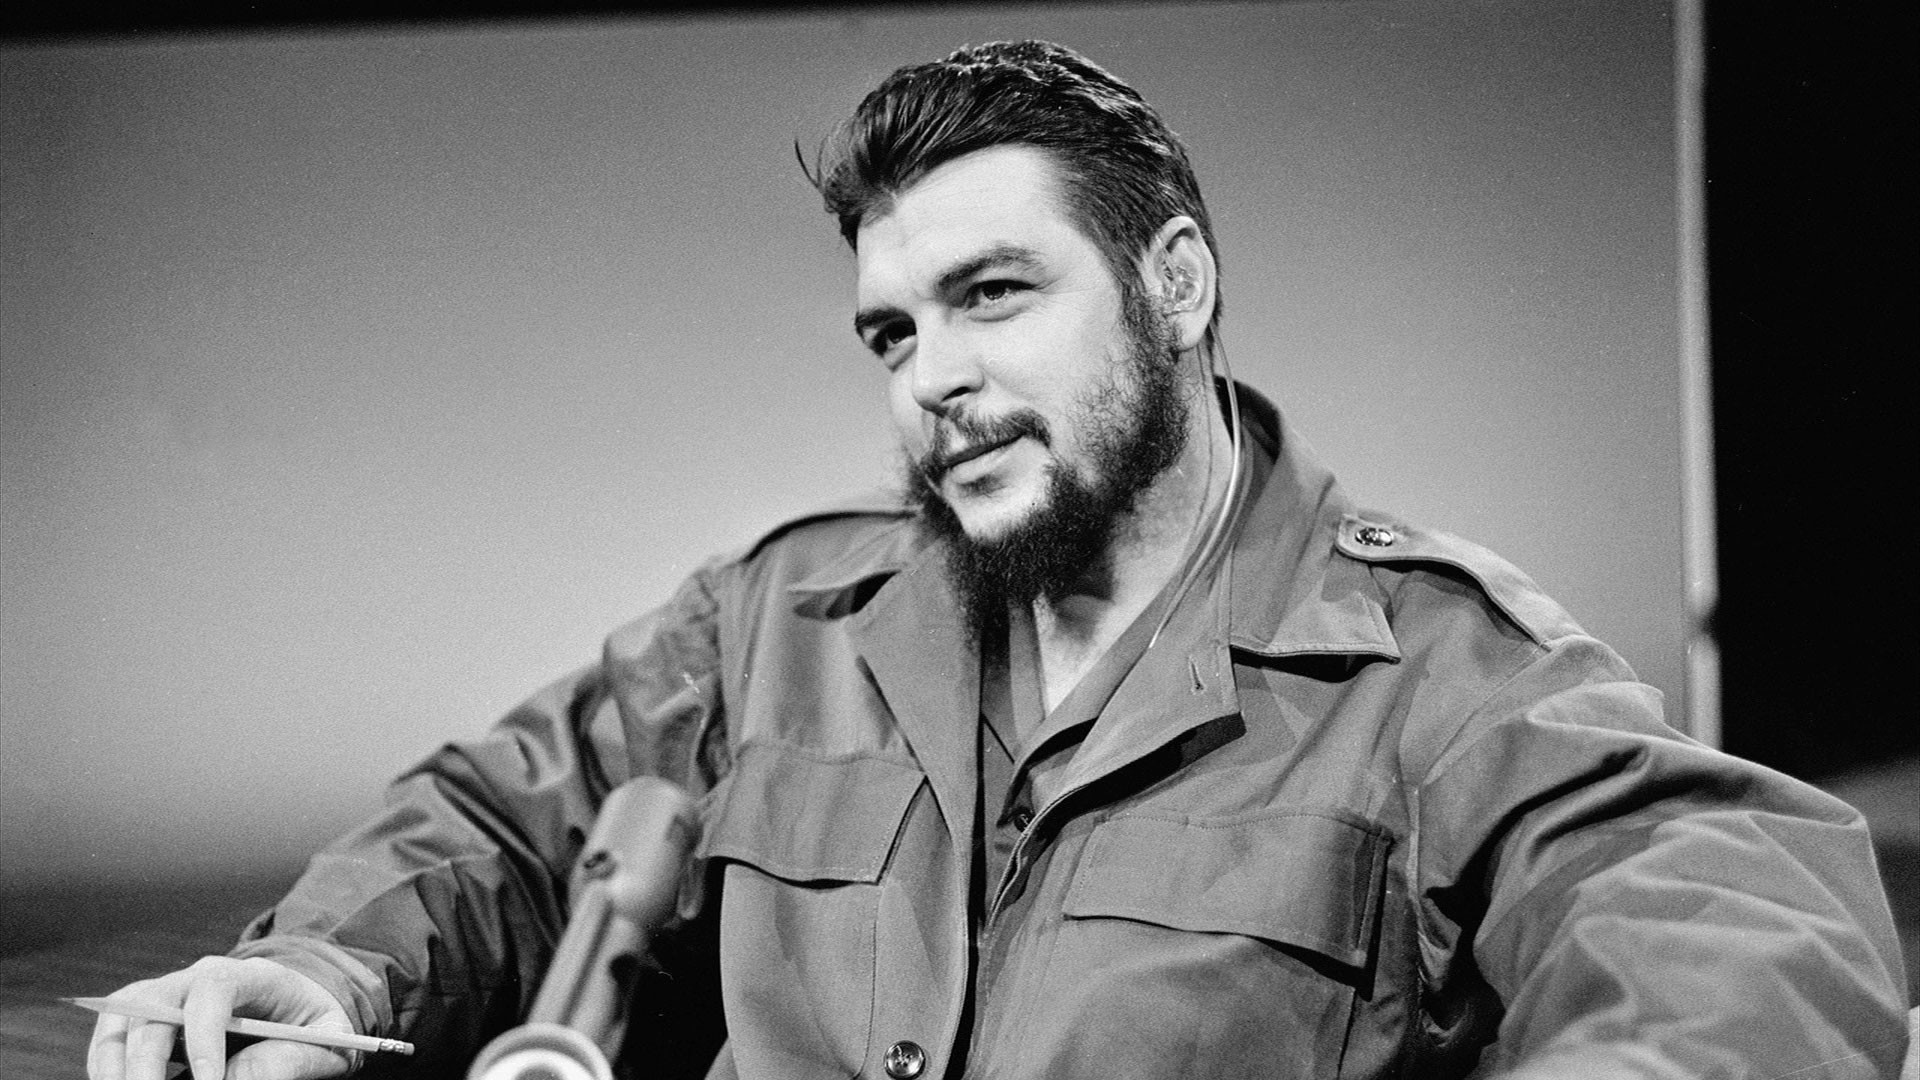 1920x1080 Remembering Che Guevara 50 years after his assassination | Green Left Weekly